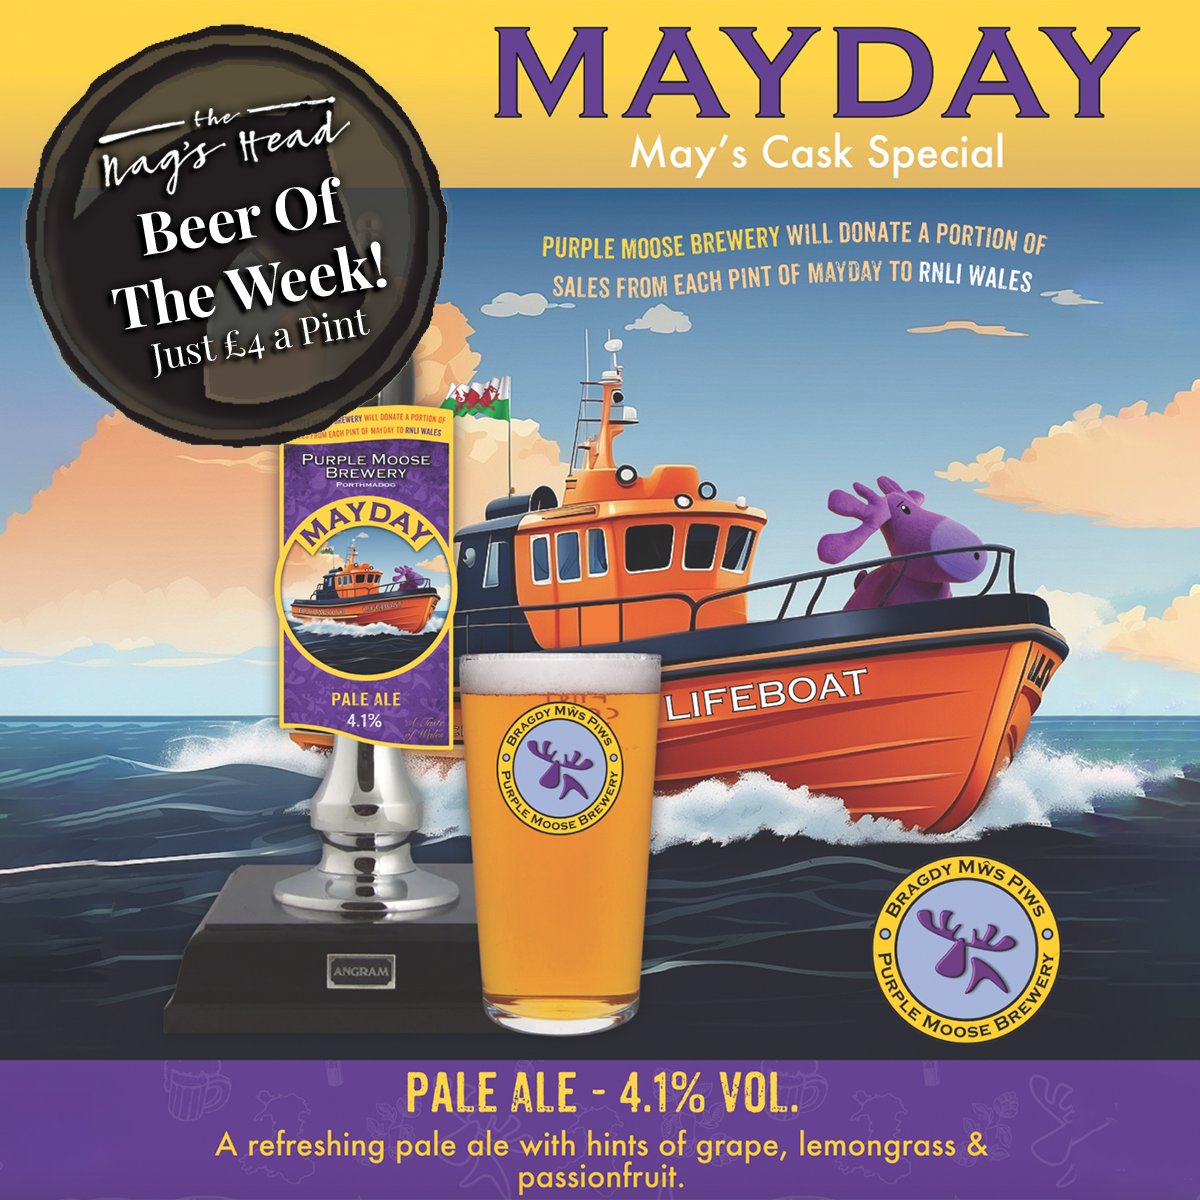 Just tapped this evening - @PurpleMooseBrew #MAYDAY Pale Ale! 💜🍺
This #BeerOfTheWeek is just £4 a pint (with a portion of each sale going to @RNLI Wales) 🚤🛟🏴󠁧󠁢󠁷󠁬󠁳󠁿
Pop in this week to enjoy a pint! 😄🍻

#RNLI #PurpleMoose #LocalBrewery #LoveLocal #SupportLocal #LocalAle #PaleAle